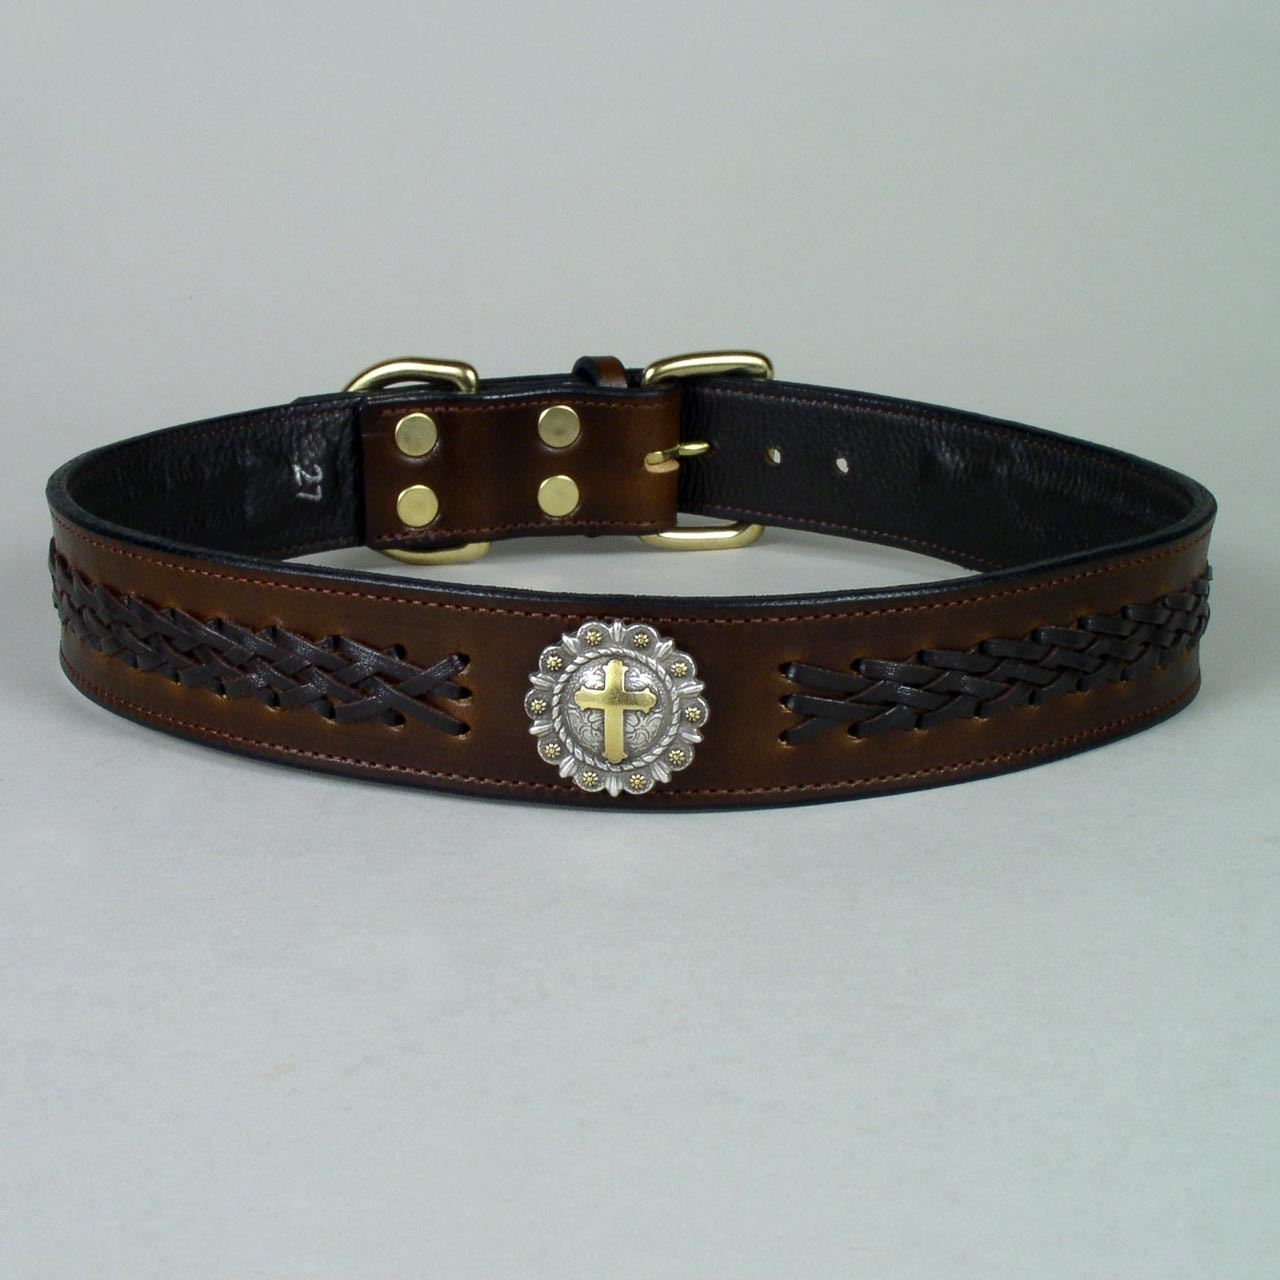 Pawmark Leather Braided Quick-Snap Collars with Conchos, Leather Braided or  Flat Collars